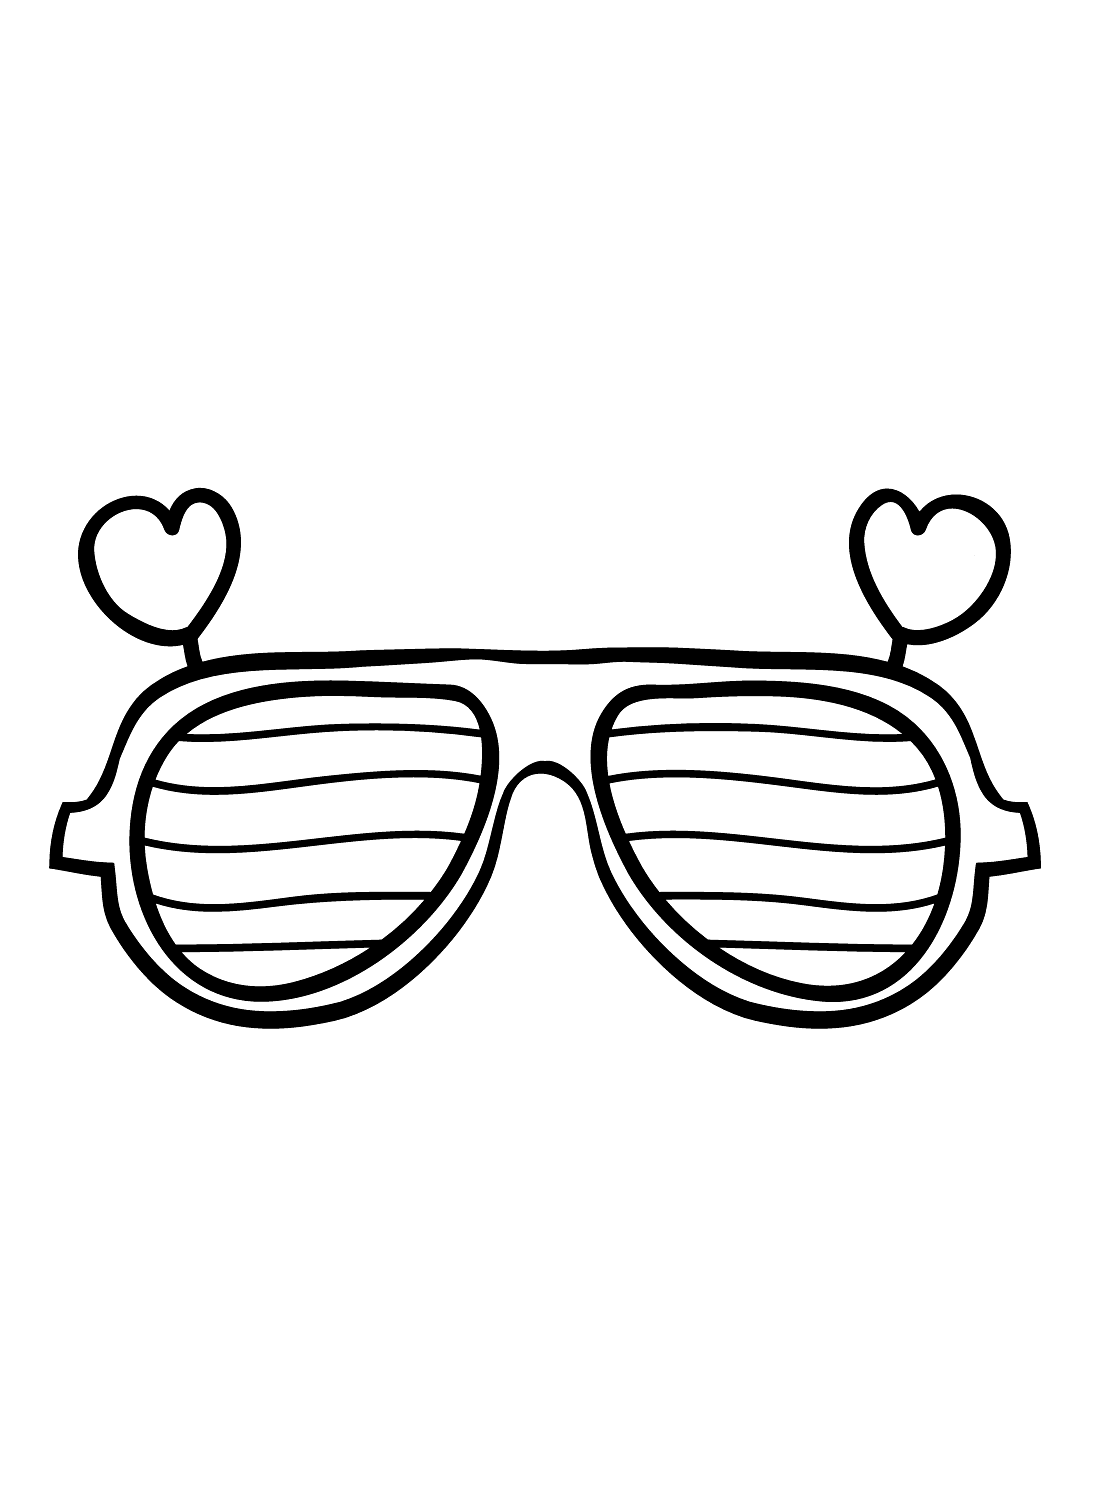 Unique Sunglasses Coloring Page Free Printable Coloring Pages